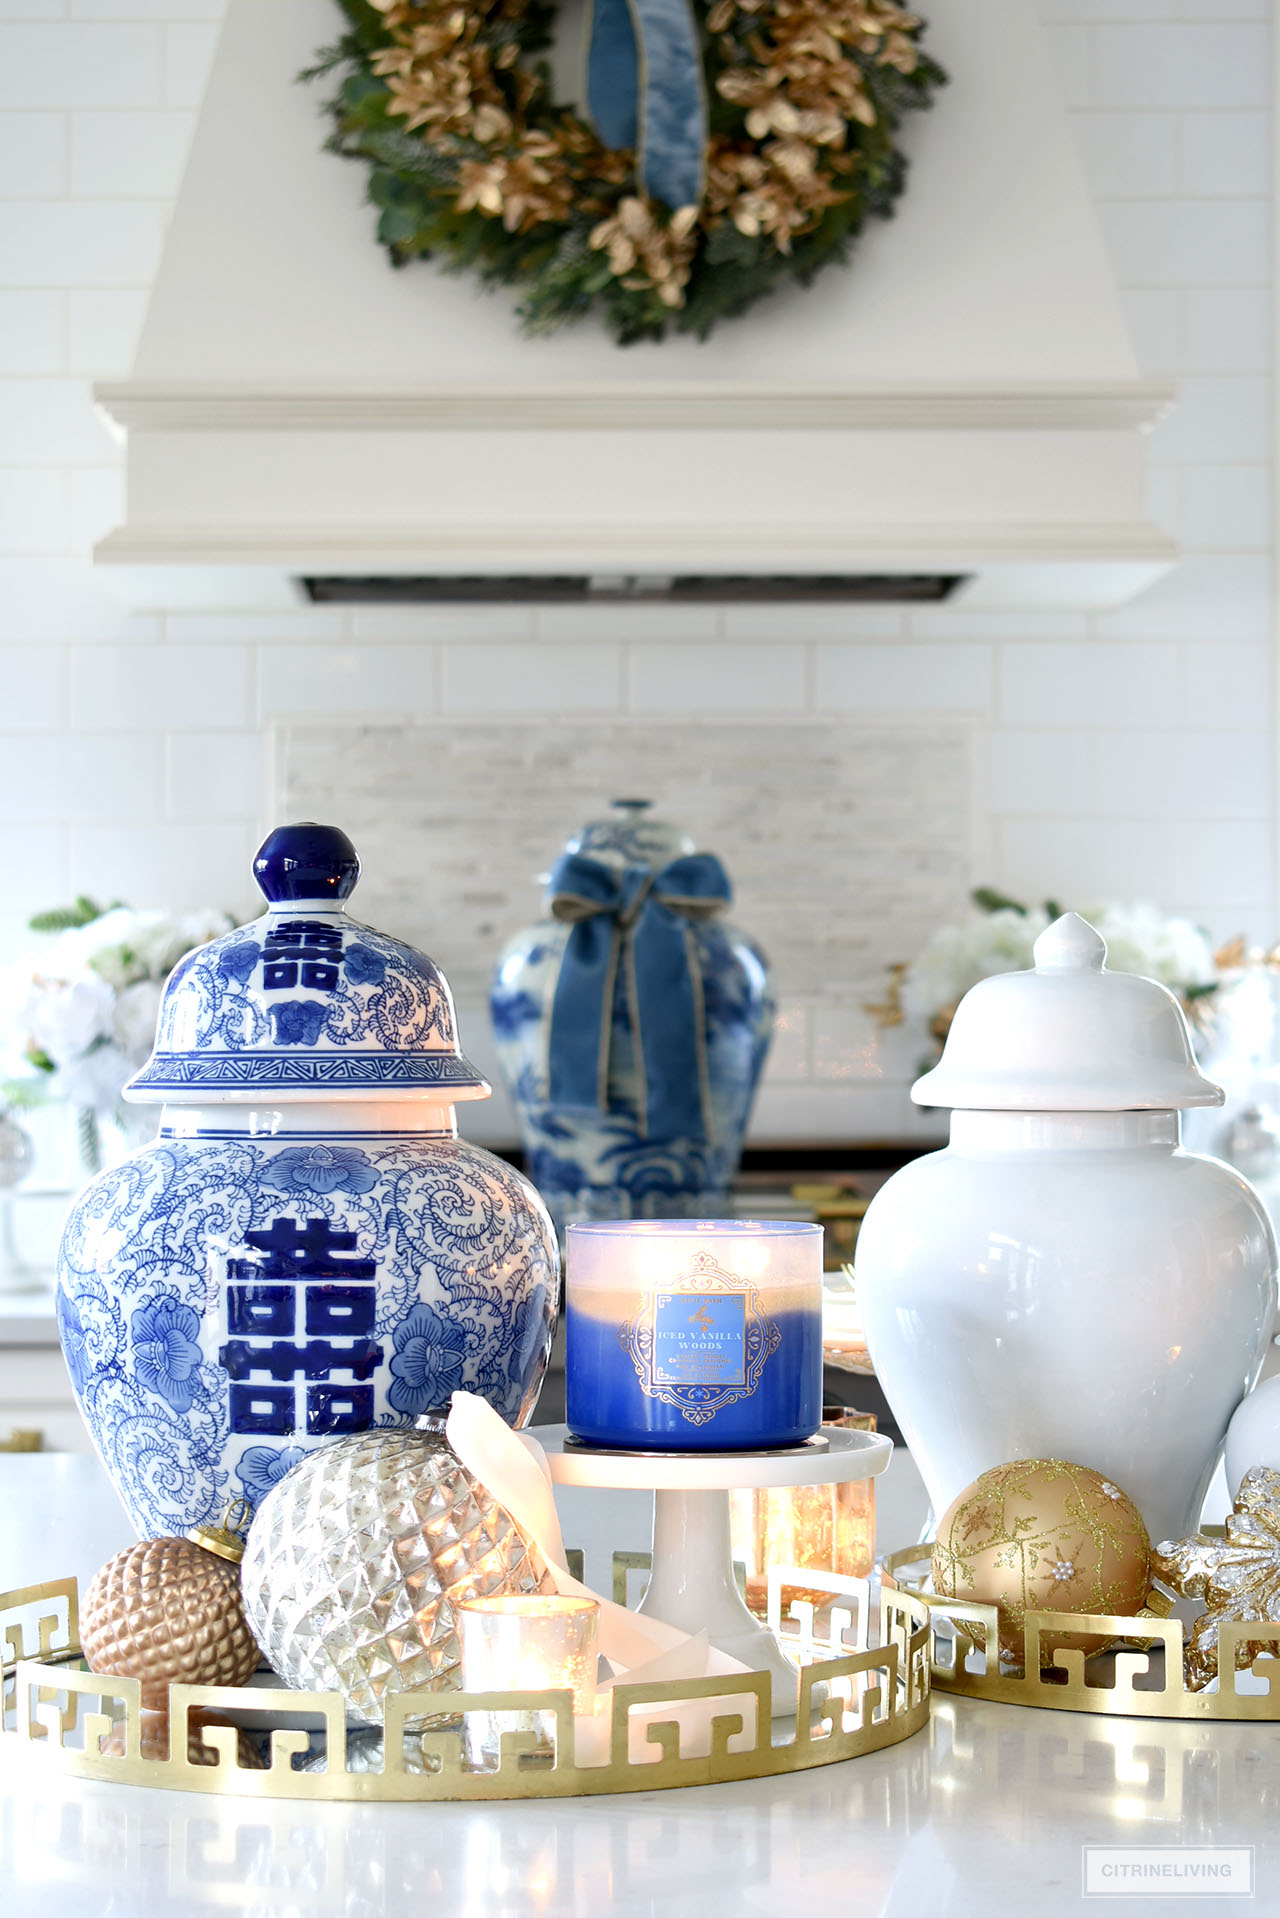 Ginger jars, candles and ornaments are displayed on chic gold trays for Christmas.